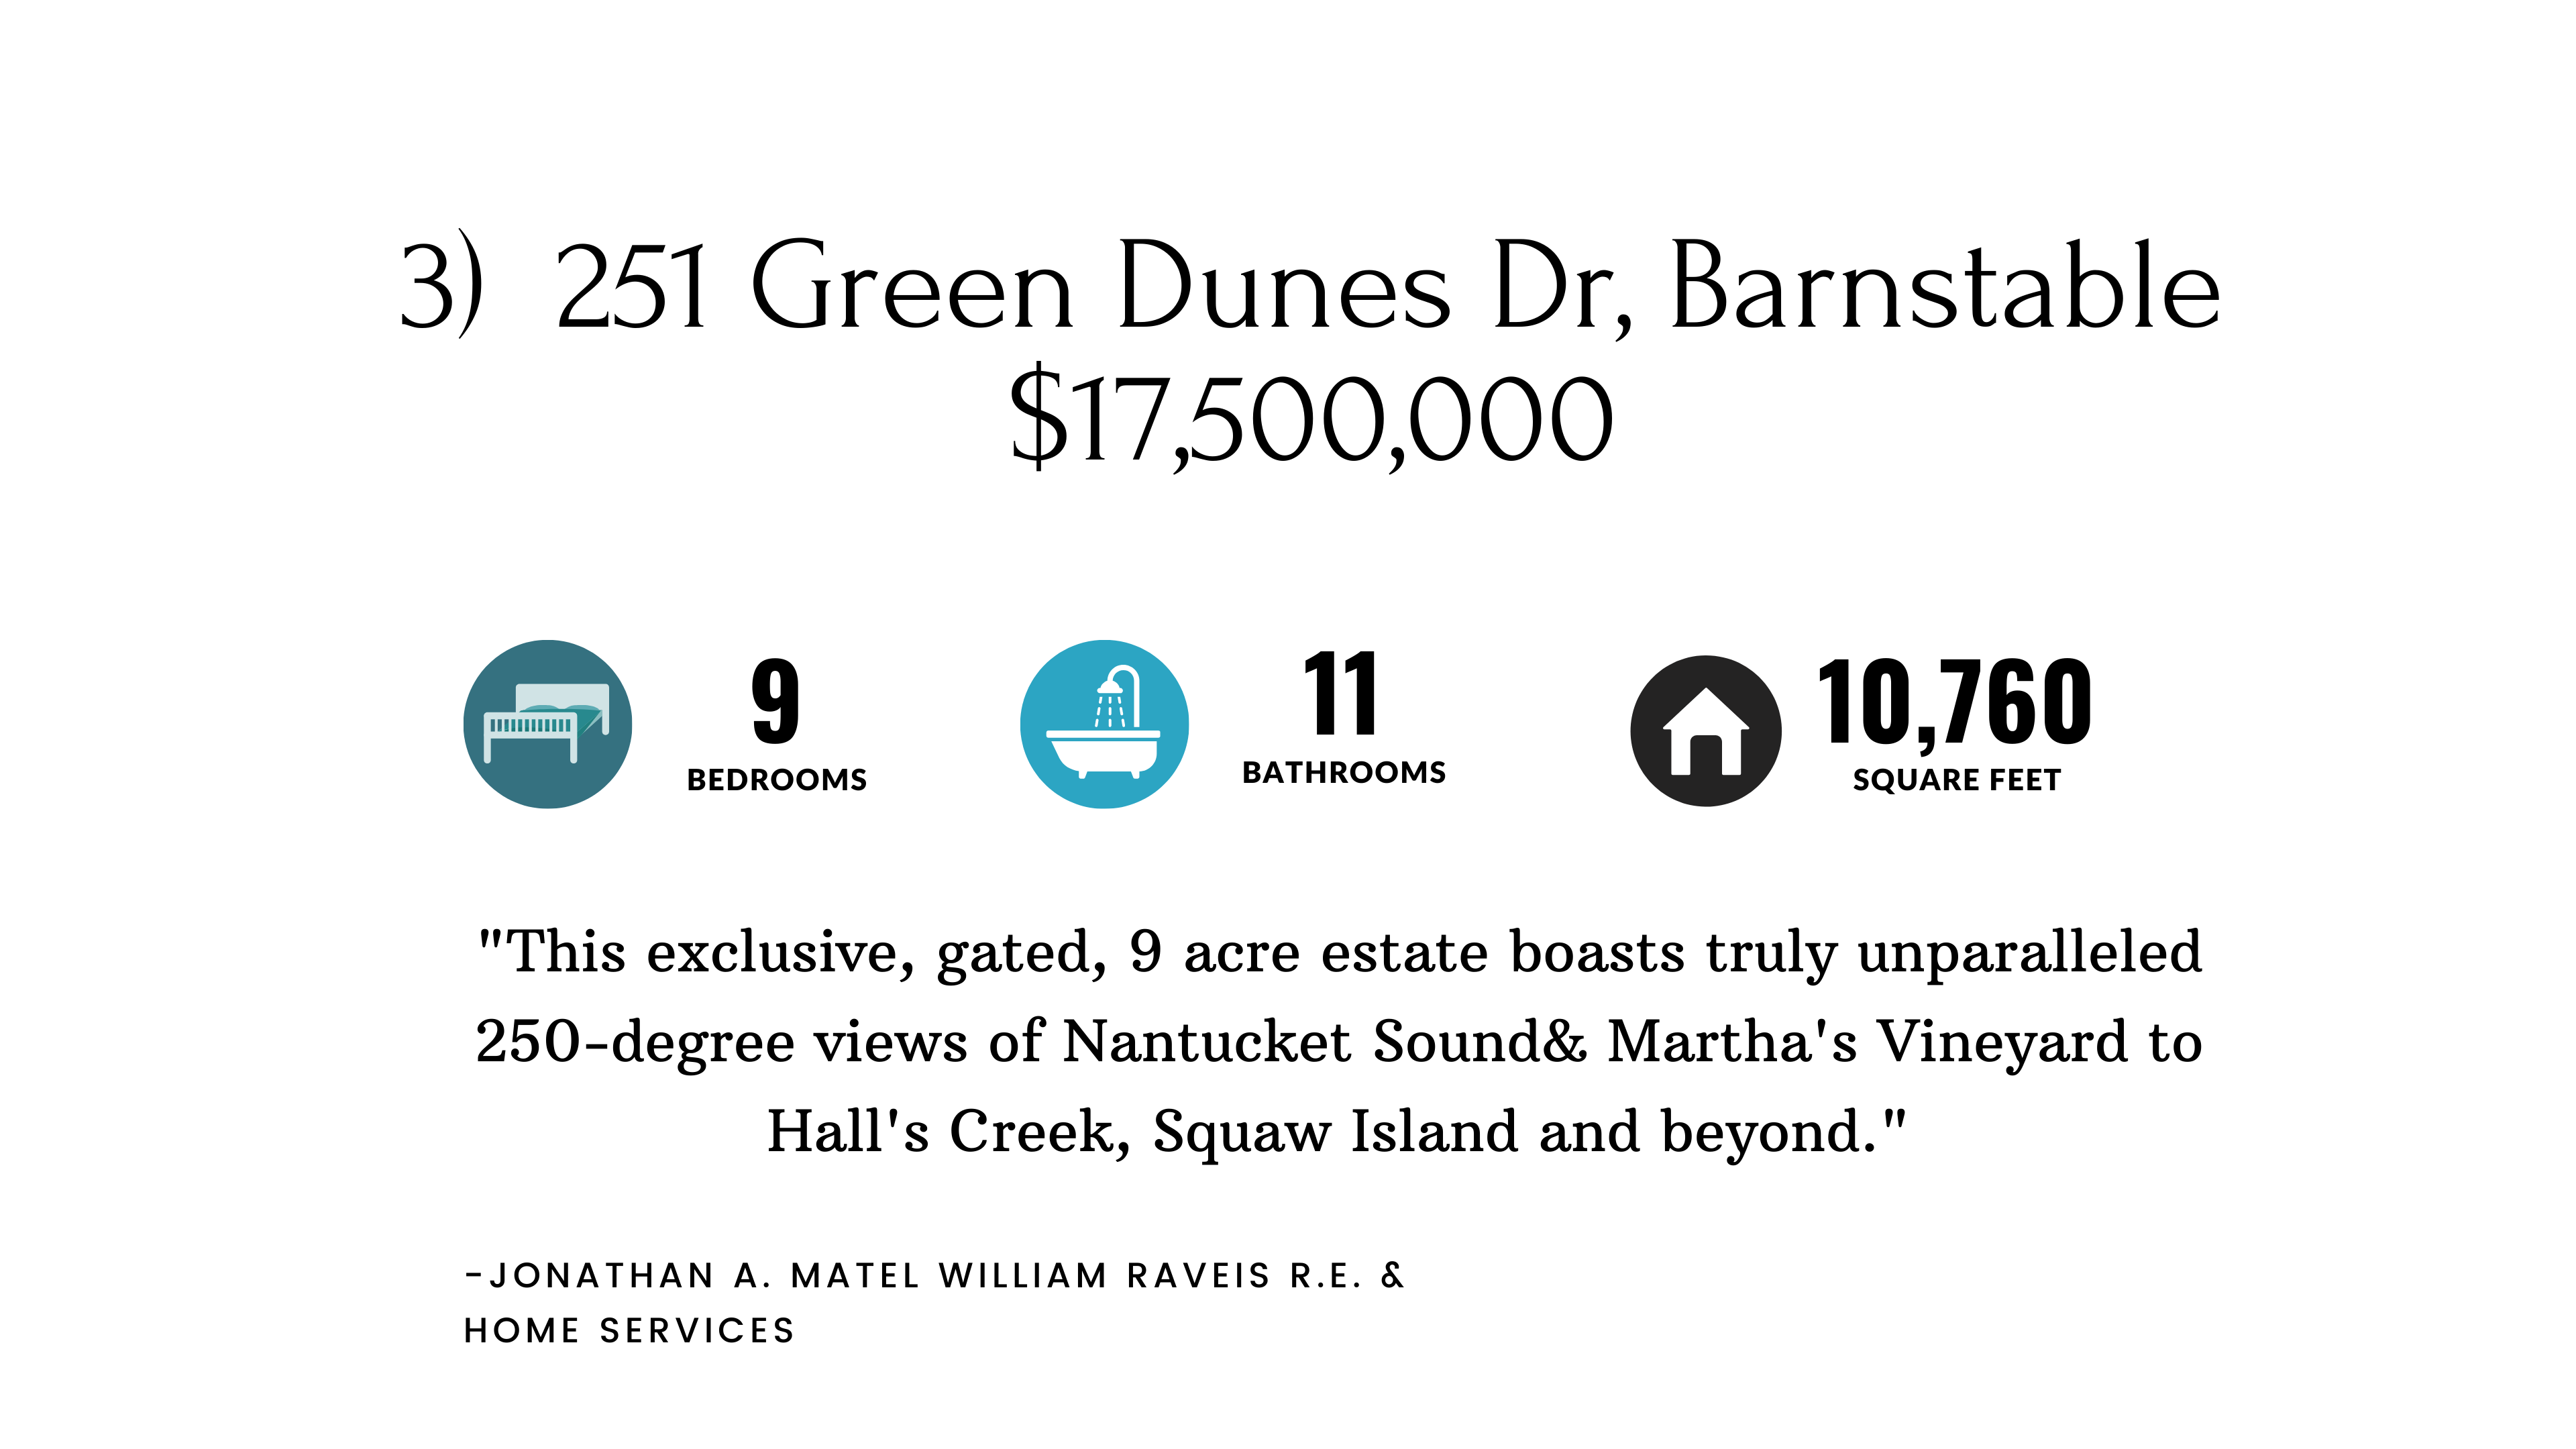 251 Green Dunes Drive in Barnstable is one of Massachusetts' most beautiful waterfront homes for sale